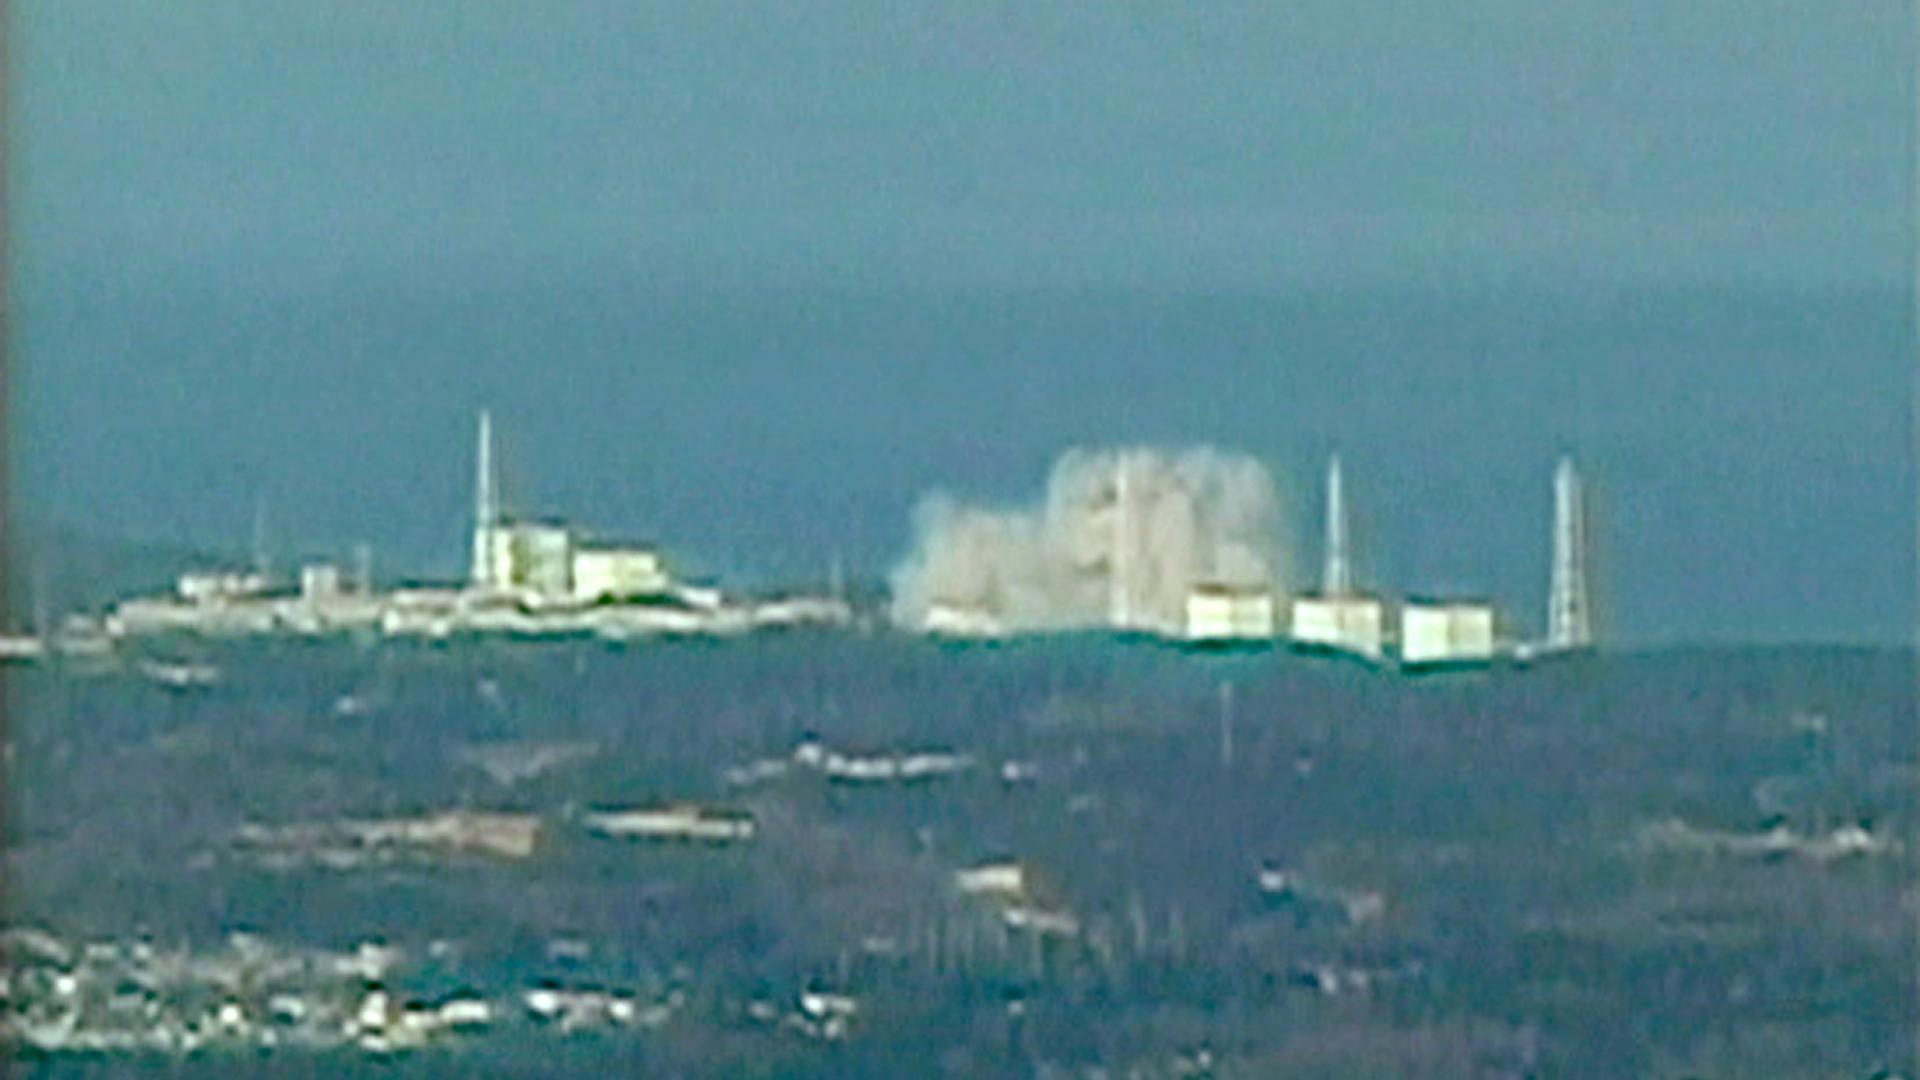 Bildwiederholung mit verändertem Bildausschnitt - An ABC 24 screengrab made available on 12 March 2011 of a plume of smoke billowing from the Fukushima 1 nuclear power station, located 250km north-east of Tokyo, Japan. One of the four buildings at the damaged Fukushima I nuclear plant has been destroyed in an apparent explosion, Japan's NHK broadcaster reported 12 March. Witnesses heard the sound of an explosion and saw white smoke emerging from the plant, NHK reported. The cause was not known. Tokyo Electric Power Co, the plant_s operator, said four people had been injured, according to the Kyodo news agency. (EDS NOTE: Picture must be used in its entirety) EPA/ABC NEWS 24/HANDOUT TV OUT, ONLINE OUT, MAGS OUT EDITORIAL USE ONLY/NO SALES ++ +++ dpa-Bildfunk +++